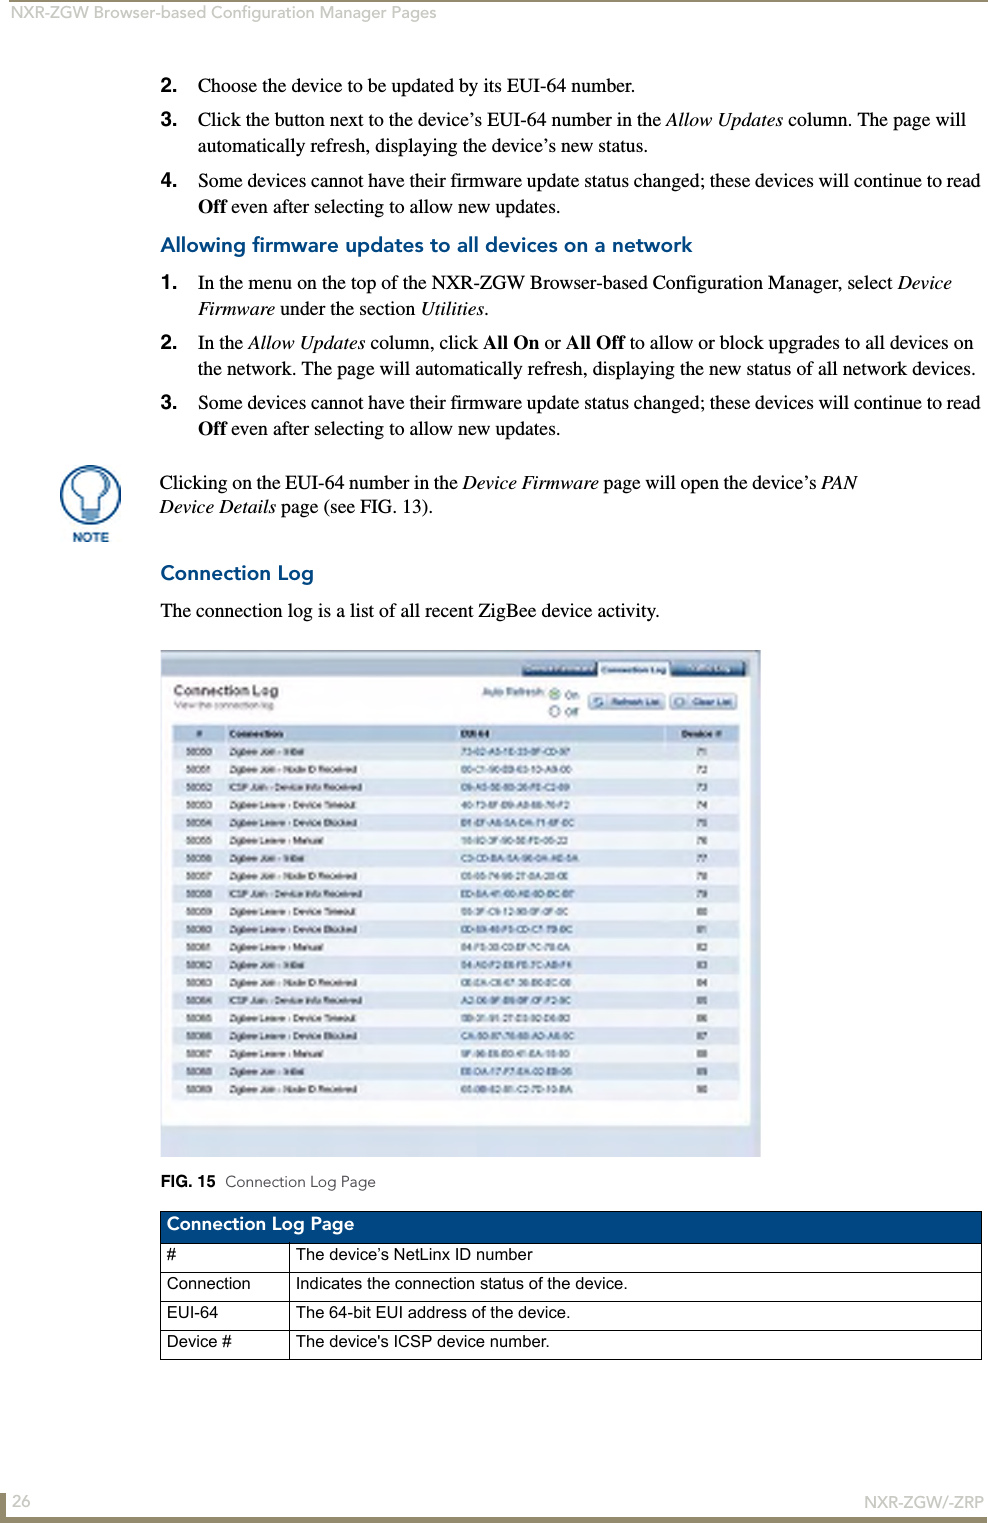 NXR-ZGW Browser-based Configuration Manager Pages26 NXR-ZGW/-ZRP2. Choose the device to be updated by its EUI-64 number.3. Click the button next to the device’s EUI-64 number in the Allow Updates column. The page will automatically refresh, displaying the device’s new status.4. Some devices cannot have their firmware update status changed; these devices will continue to read Off even after selecting to allow new updates.Allowing firmware updates to all devices on a network1. In the menu on the top of the NXR-ZGW Browser-based Configuration Manager, select Device Firmware under the section Utilities.2. In the Allow Updates column, click All On or All Off to allow or block upgrades to all devices on the network. The page will automatically refresh, displaying the new status of all network devices.3. Some devices cannot have their firmware update status changed; these devices will continue to read Off even after selecting to allow new updates.Connection LogThe connection log is a list of all recent ZigBee device activity.    Clicking on the EUI-64 number in the Device Firmware page will open the device’s PAN  Device Details page (see FIG. 13).FIG. 15  Connection Log PageConnection Log Page# The device’s NetLinx ID numberConnection Indicates the connection status of the device.EUI-64 The 64-bit EUI address of the device.Device # The device&apos;s ICSP device number.